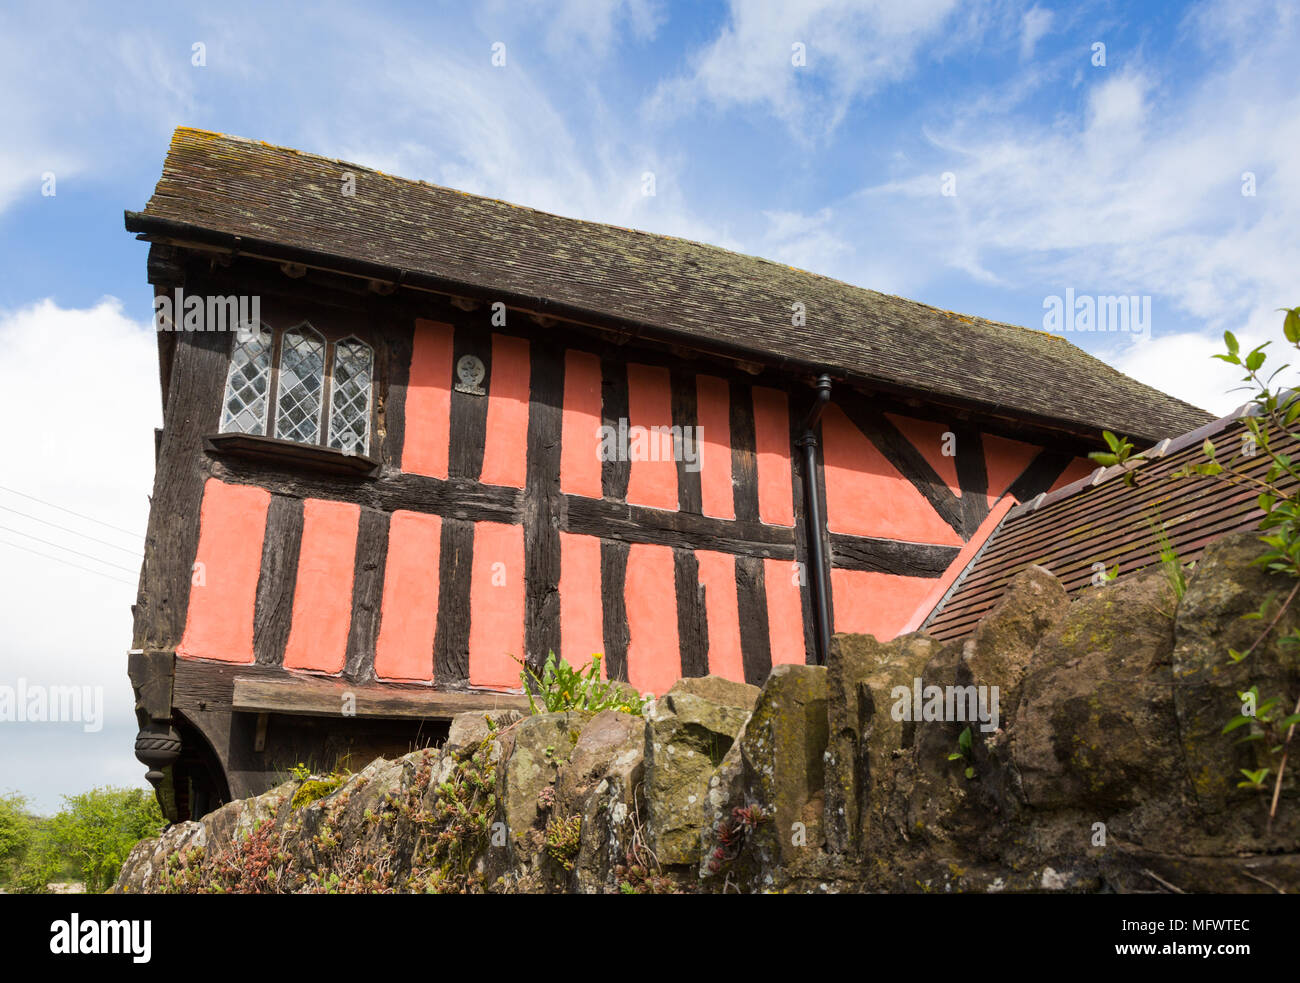 Black and pink timber framed house, Weobley, Herefordshire UK Stock Photo